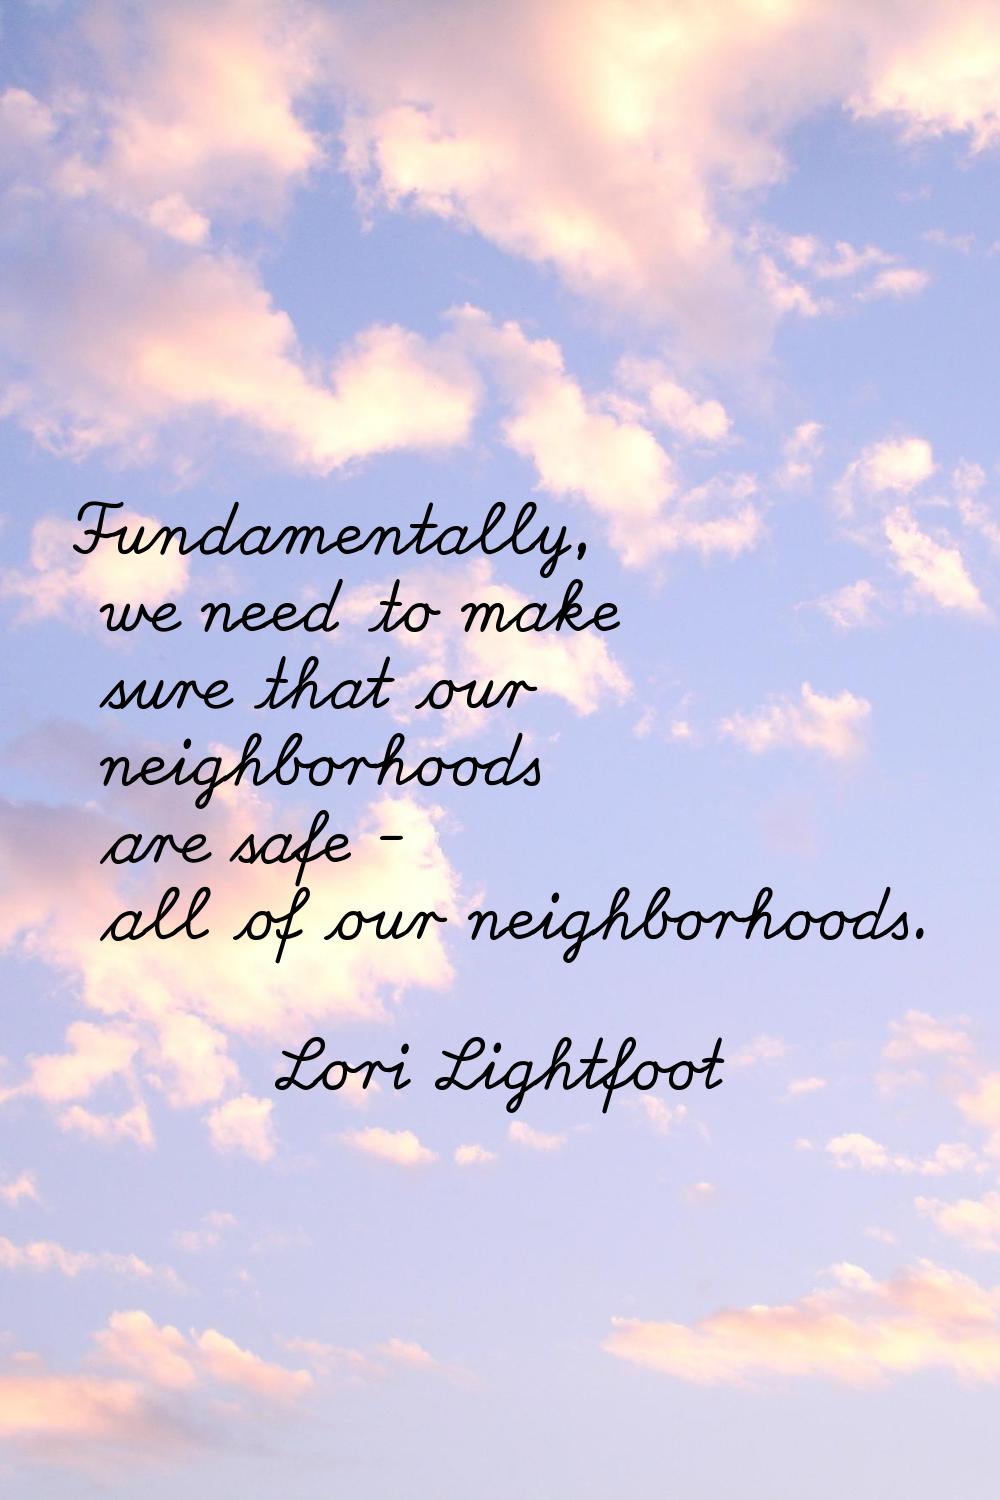 Fundamentally, we need to make sure that our neighborhoods are safe - all of our neighborhoods.